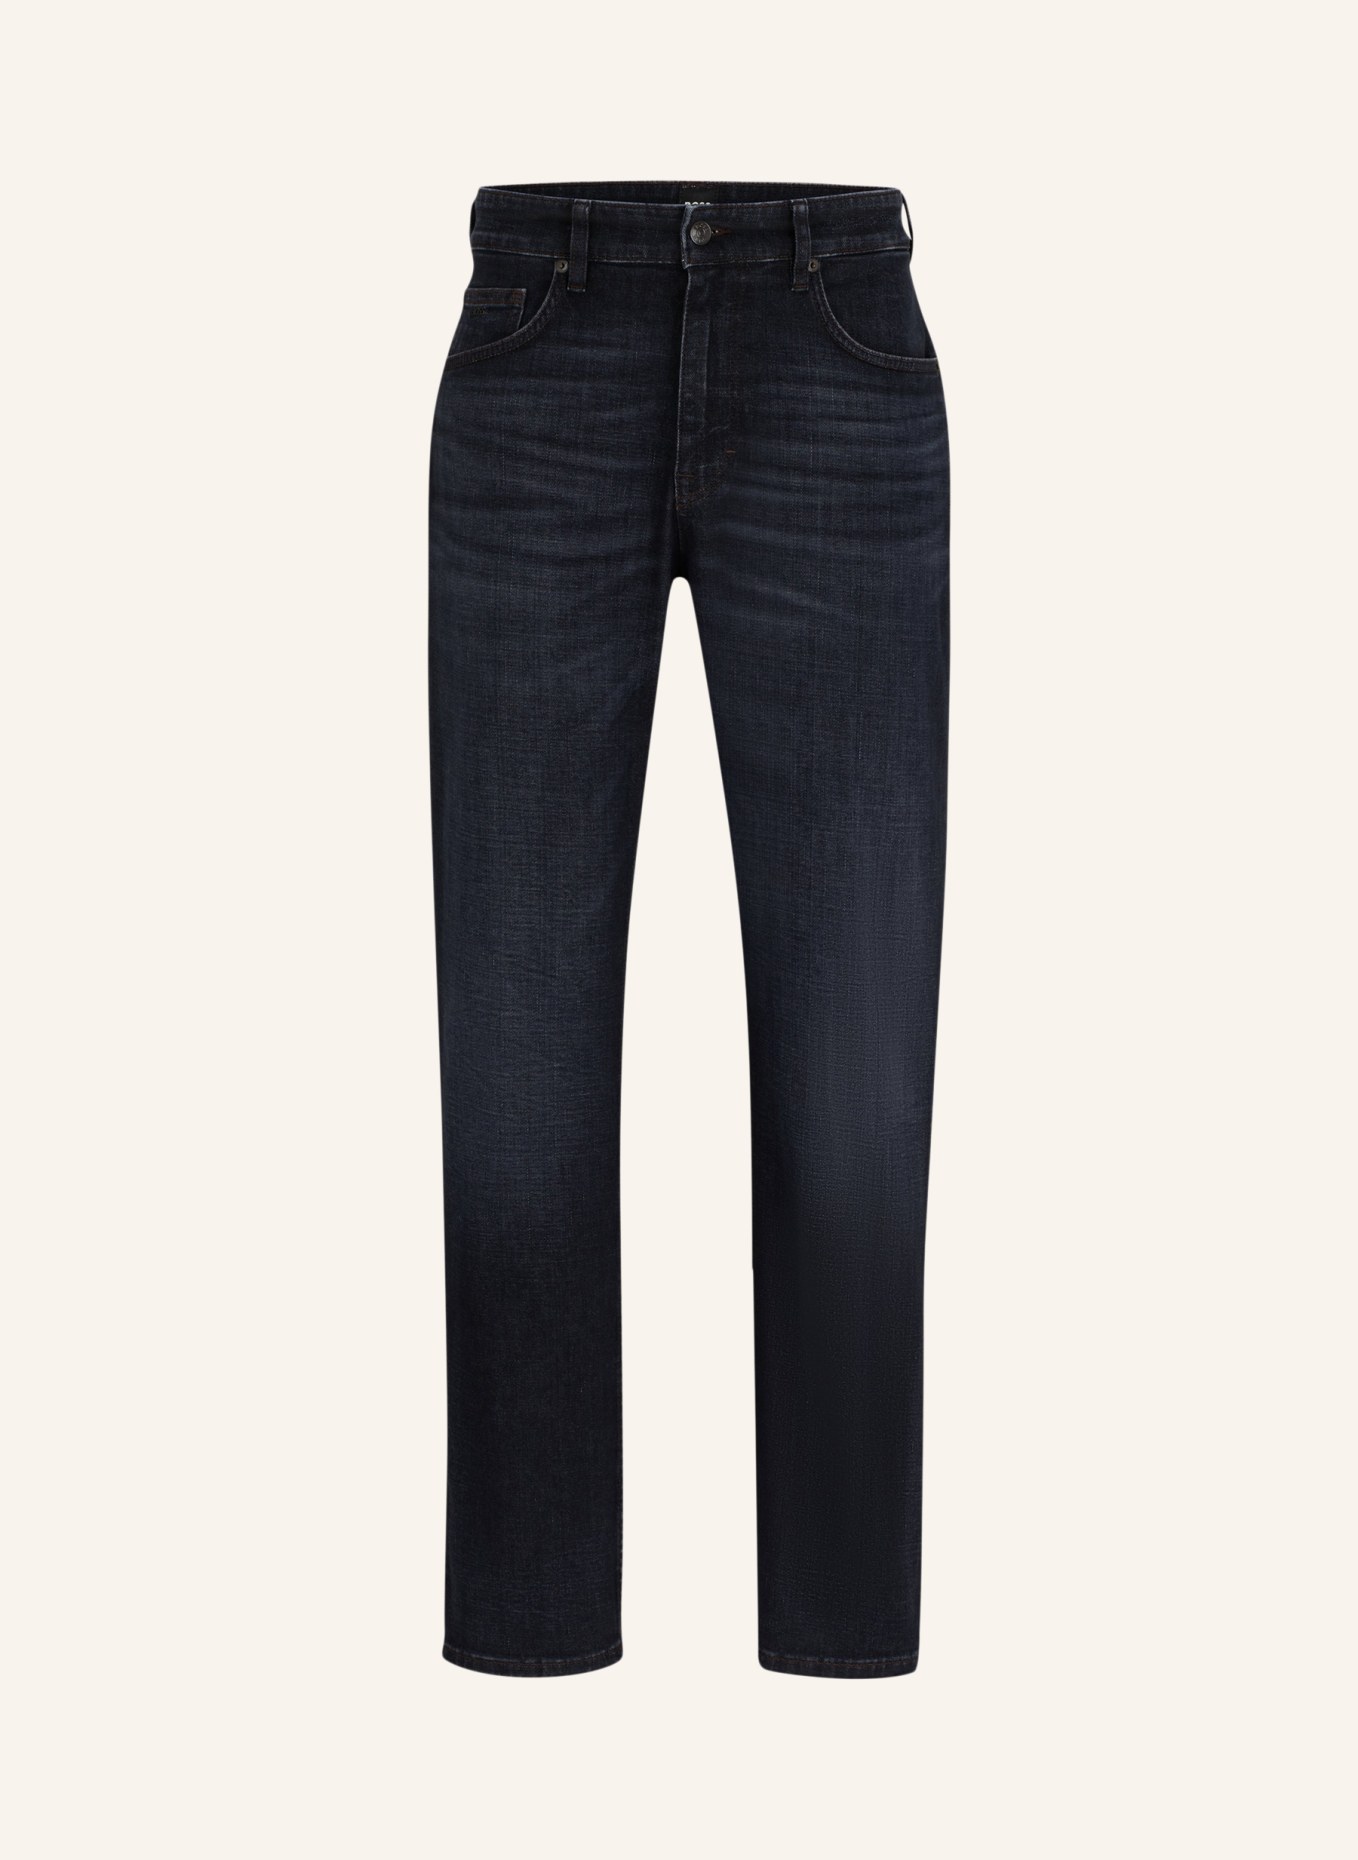 BOSS Jeans ANDERSON Relaxed Fit, Farbe: SCHWARZ (Bild 1)